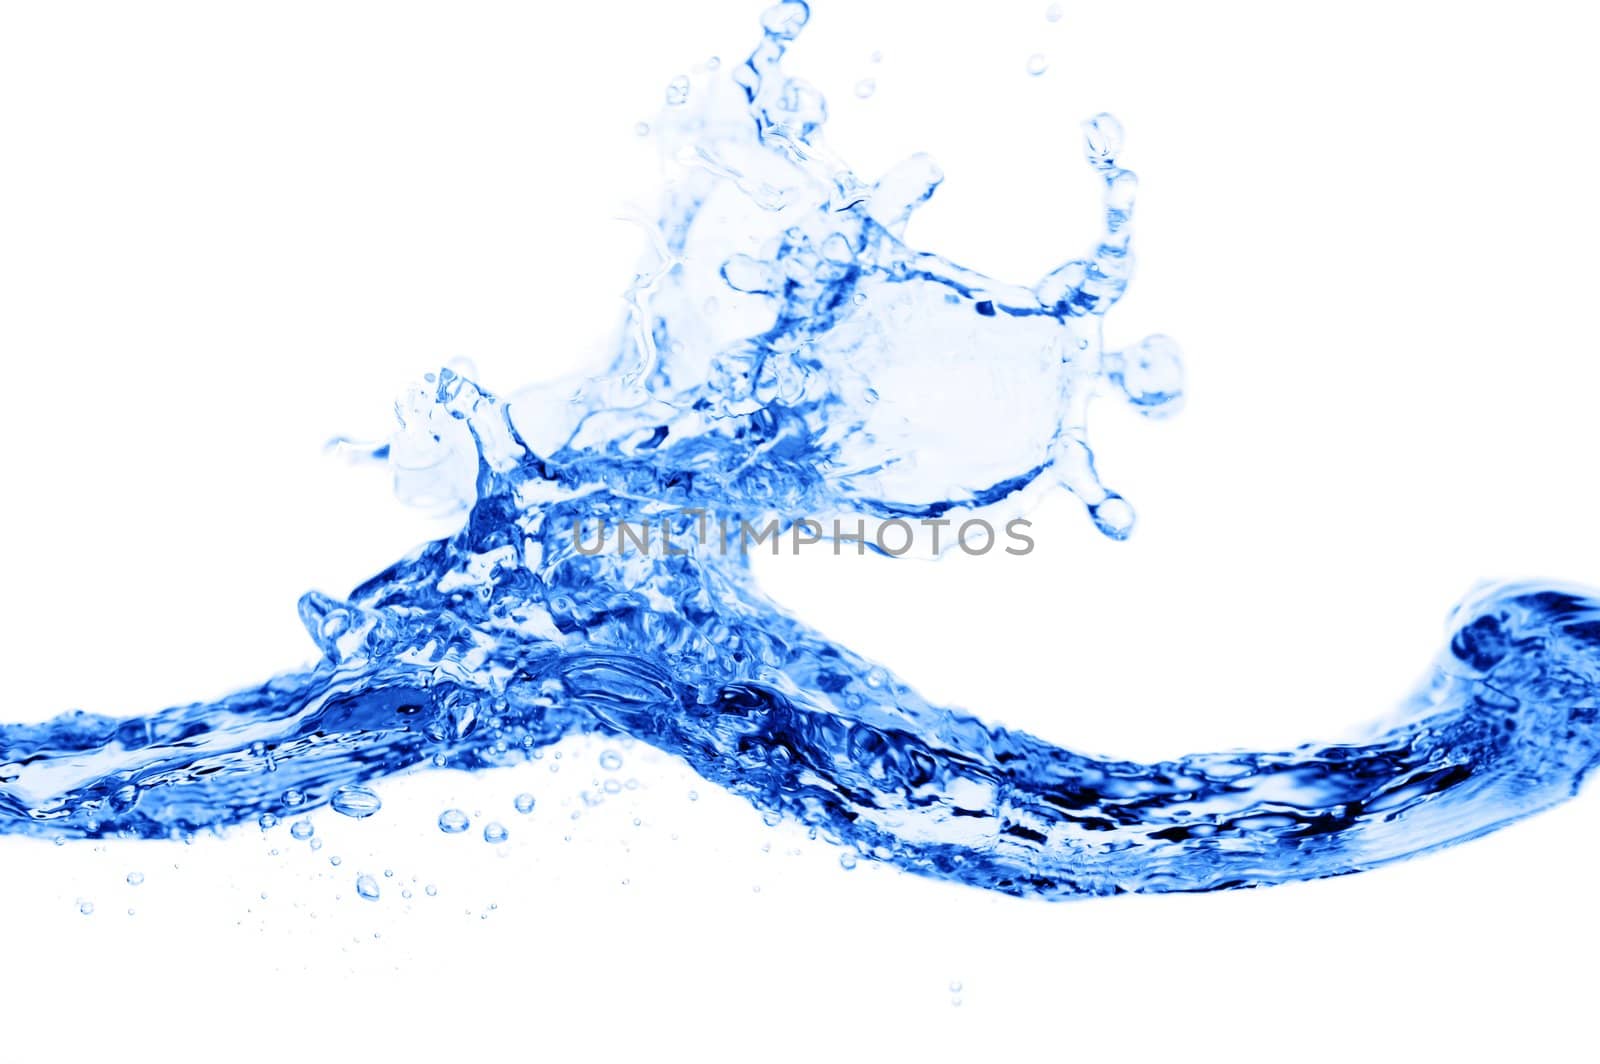 Crisp, clean, blue water photographed against a white background.